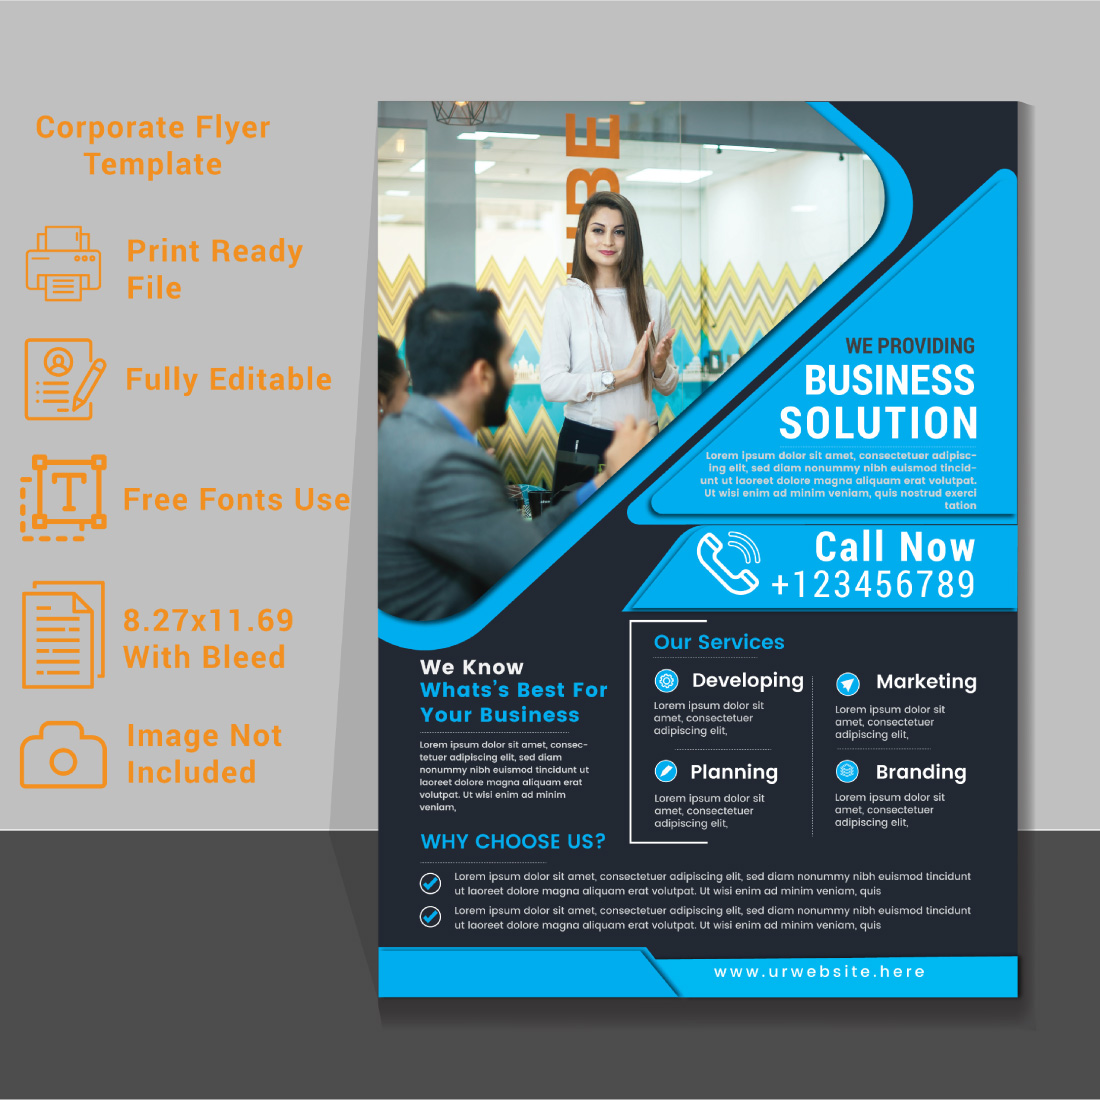 Corporate Flyer Template for your BusinessCorporate Flyer Design Template stock illustration cover image.